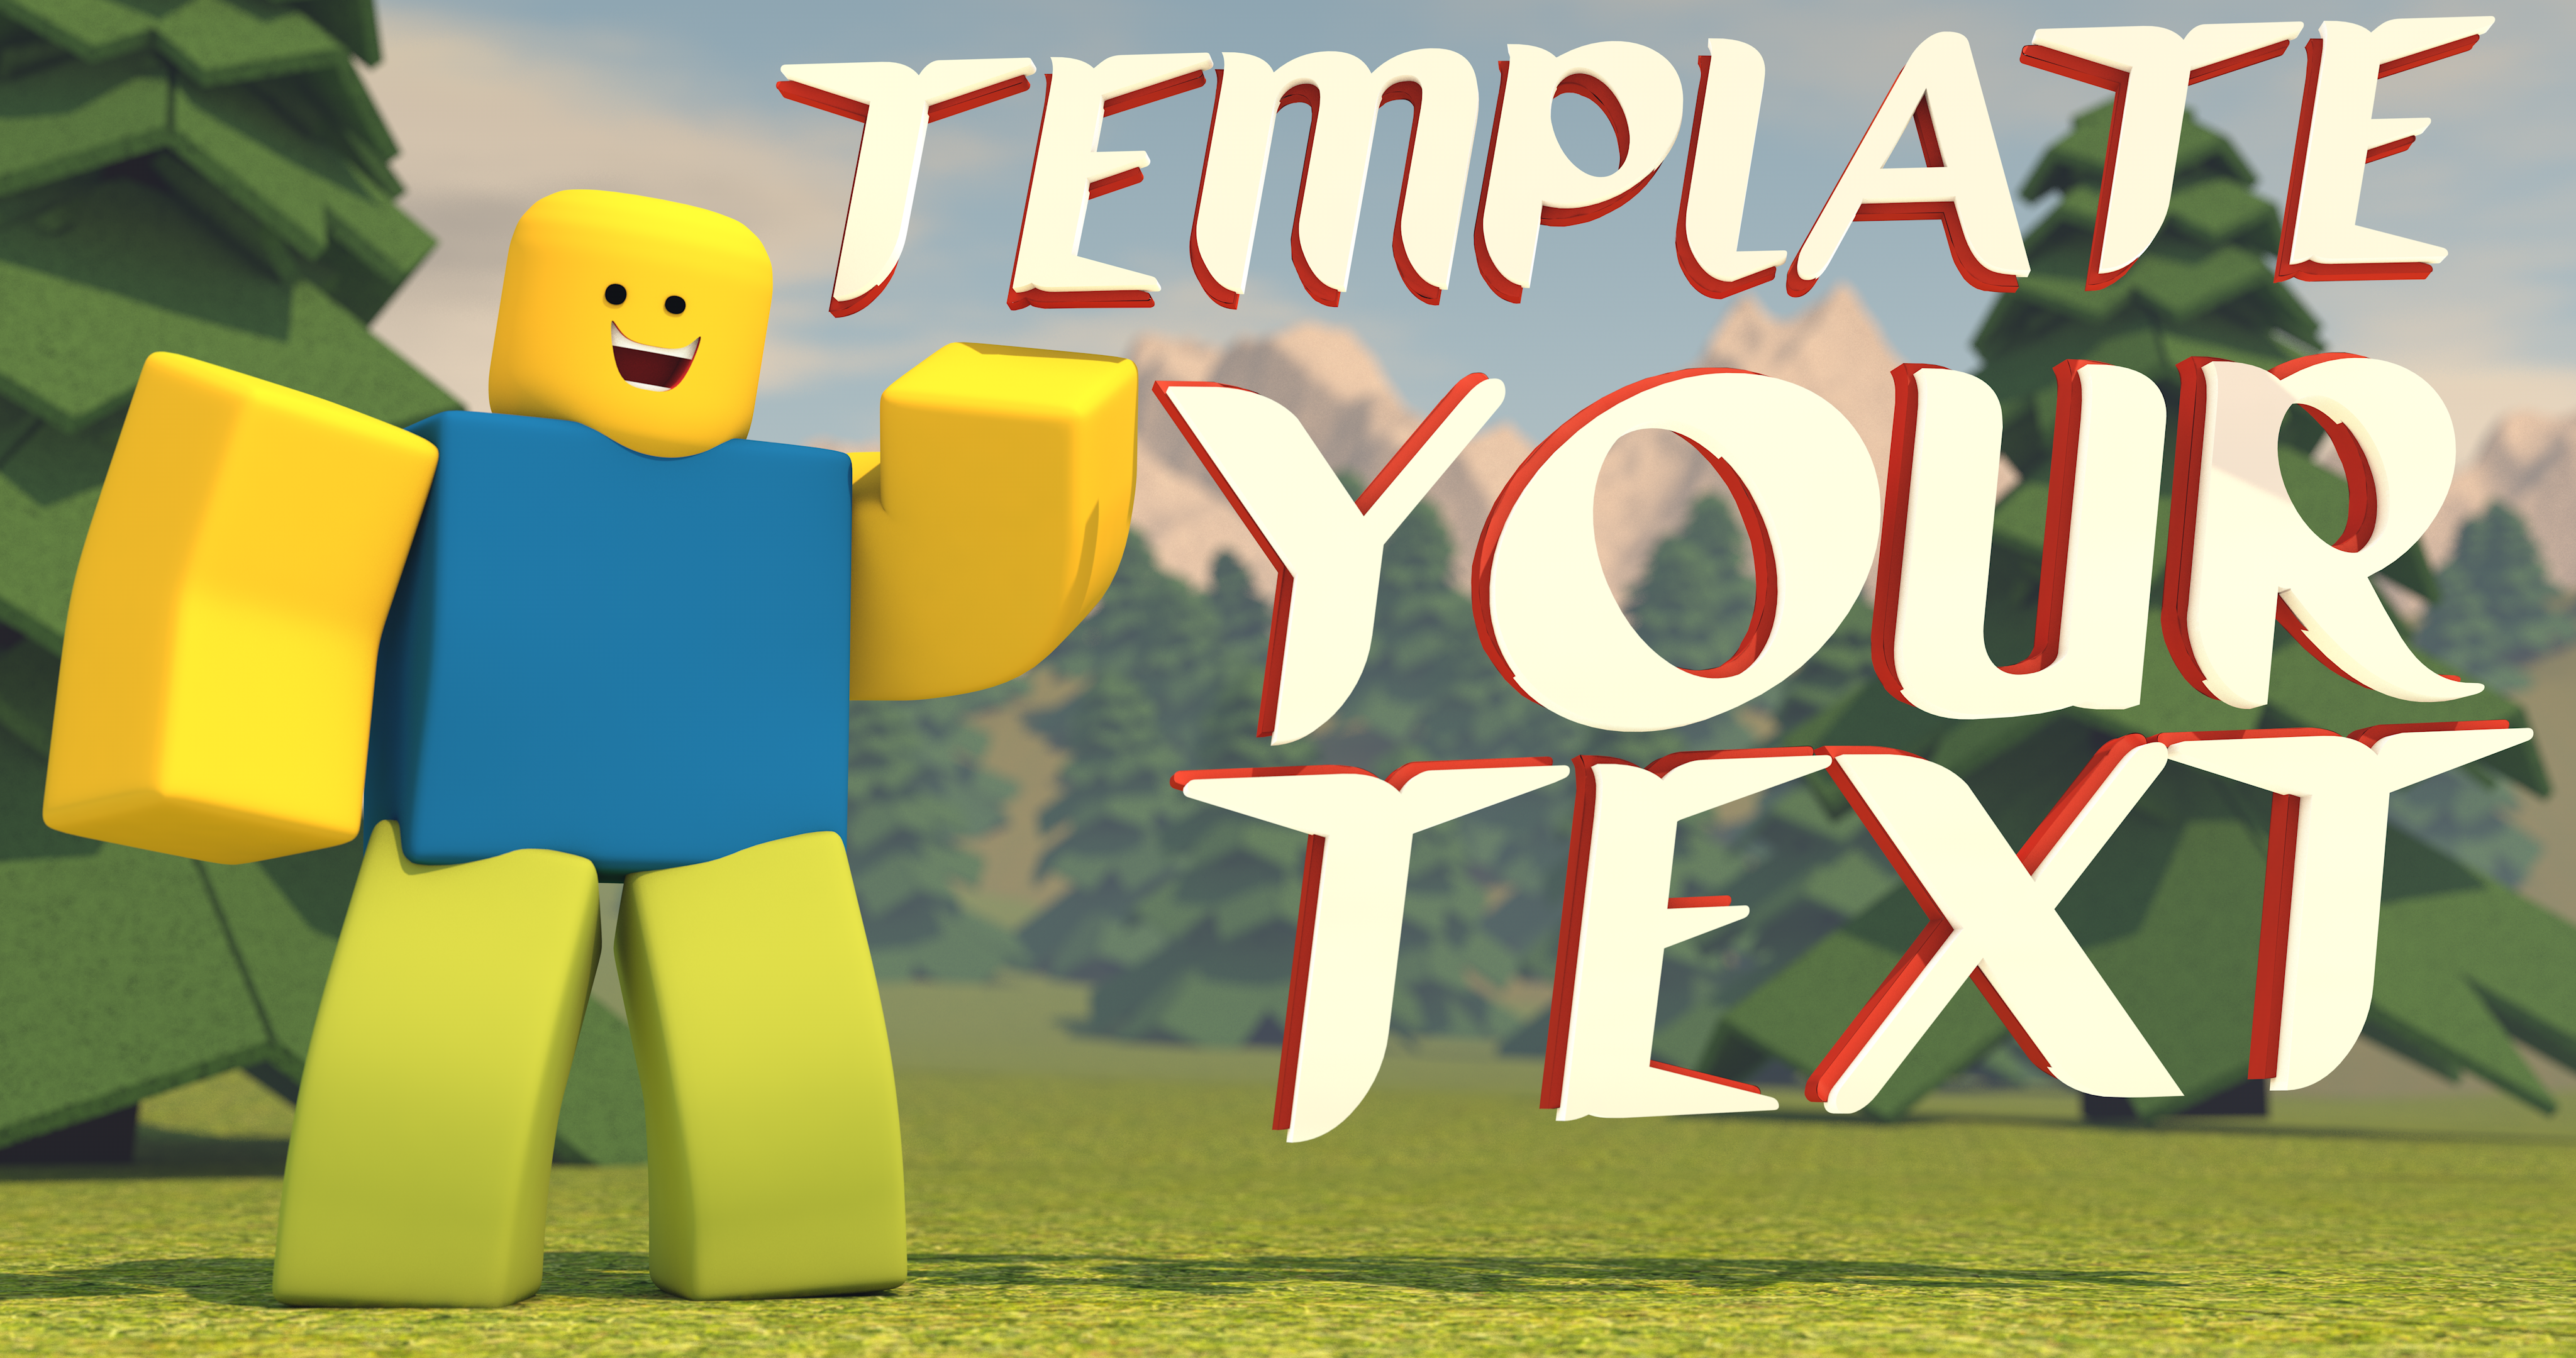 Comission Roblox Thumbnail Template Low Price By Buleredits On Deviantart - roblox game thumbnail